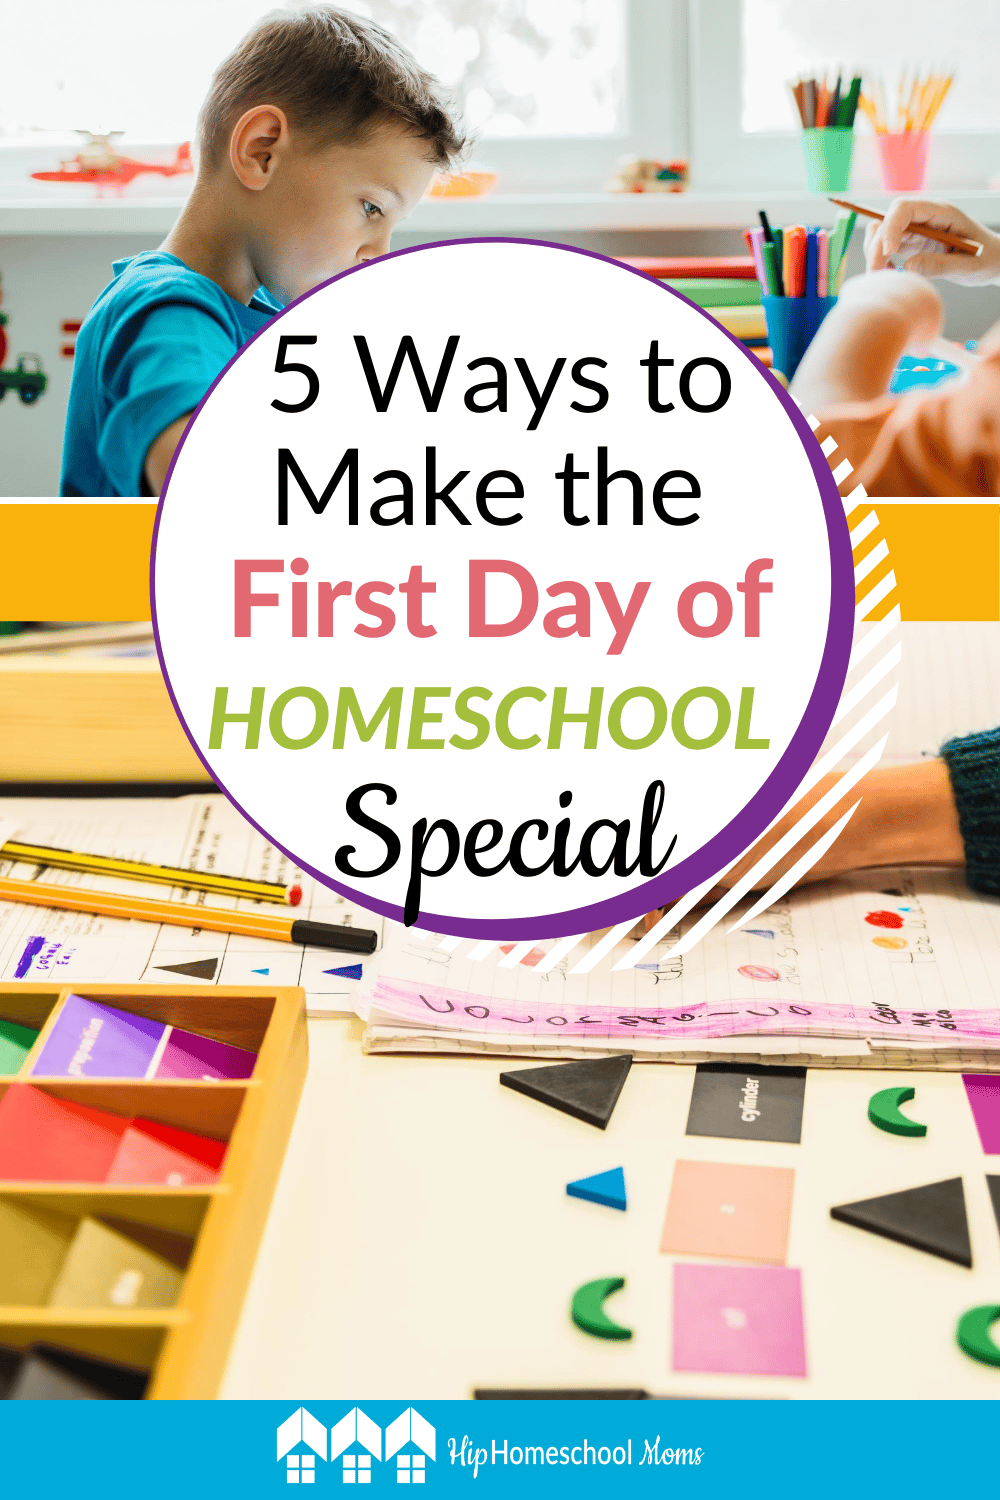 5 Ways to Make the First Day of Homeschool Special - Hip Homeschool Moms